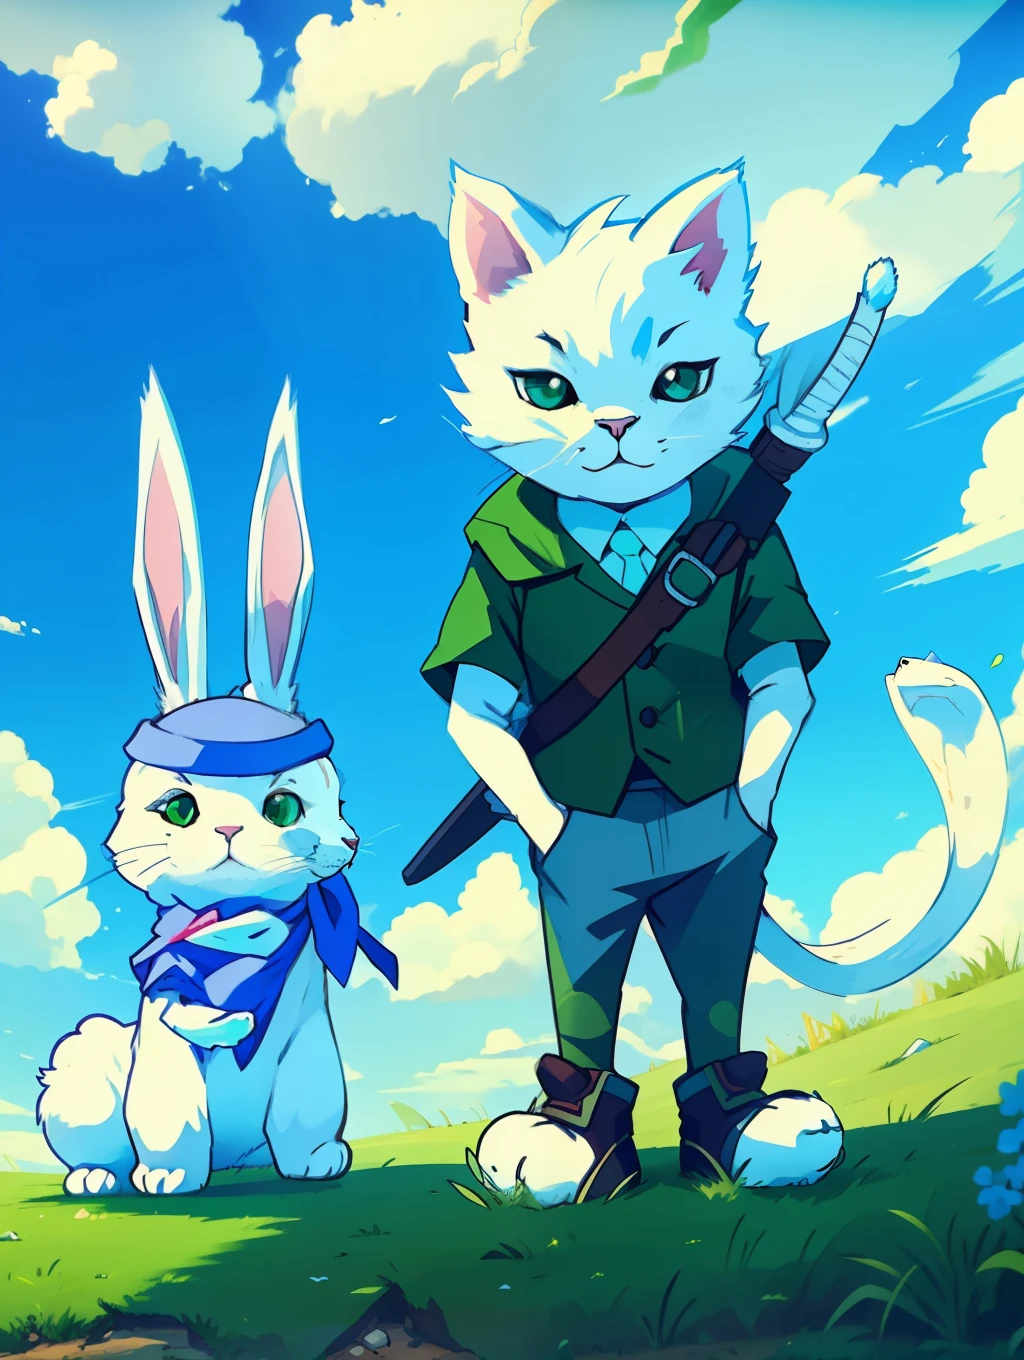 two characters, a white cat and a rabbit, background with green lawn and blue sky, Cartoon style, well-defined confrontations, bright colors and, charismatic characters